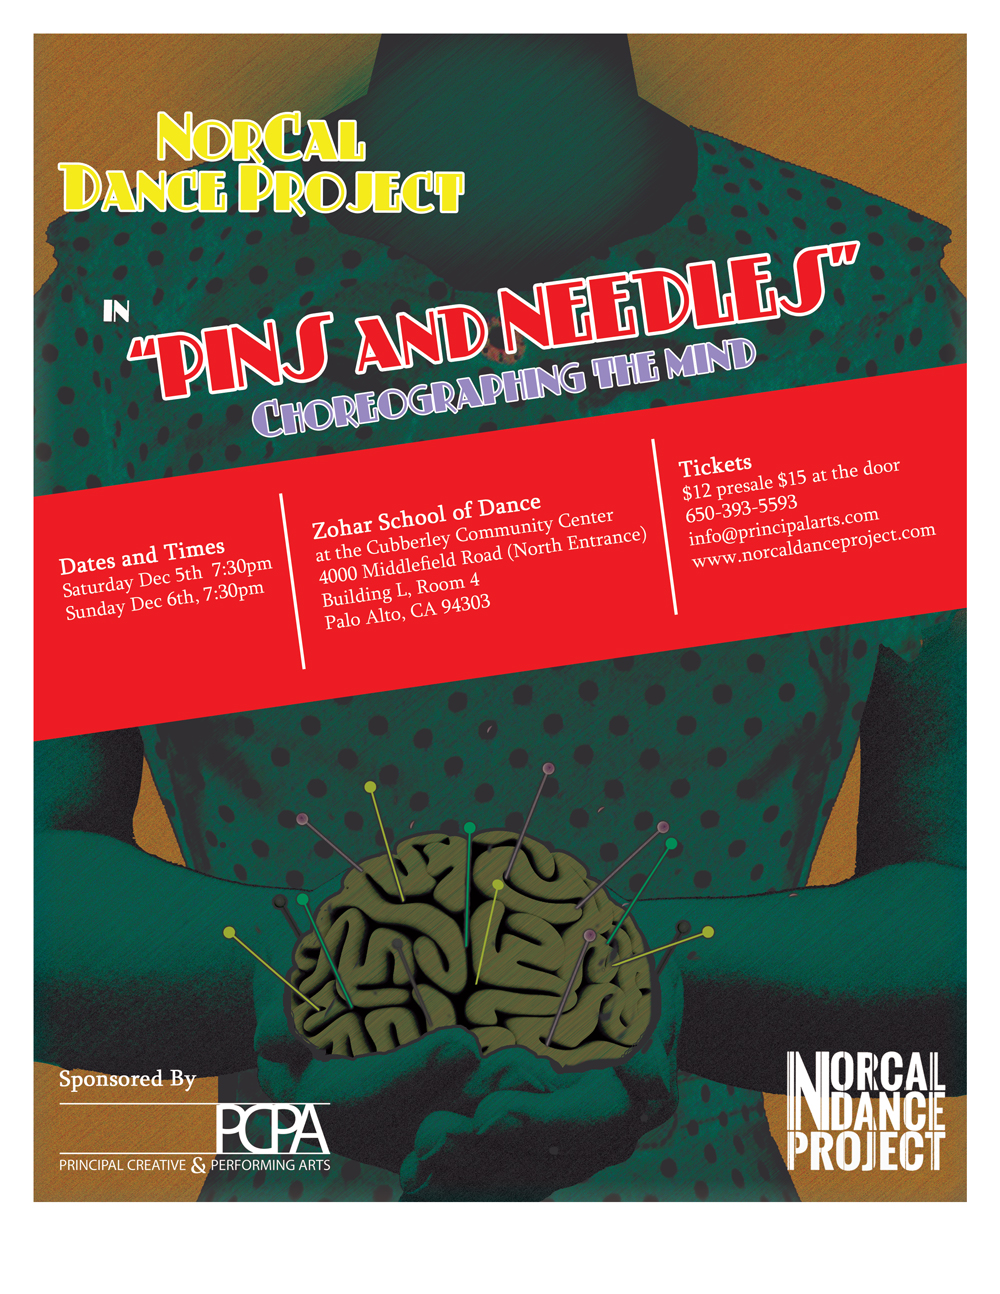 Show poster for upcoming NorCal Dance Project Performance